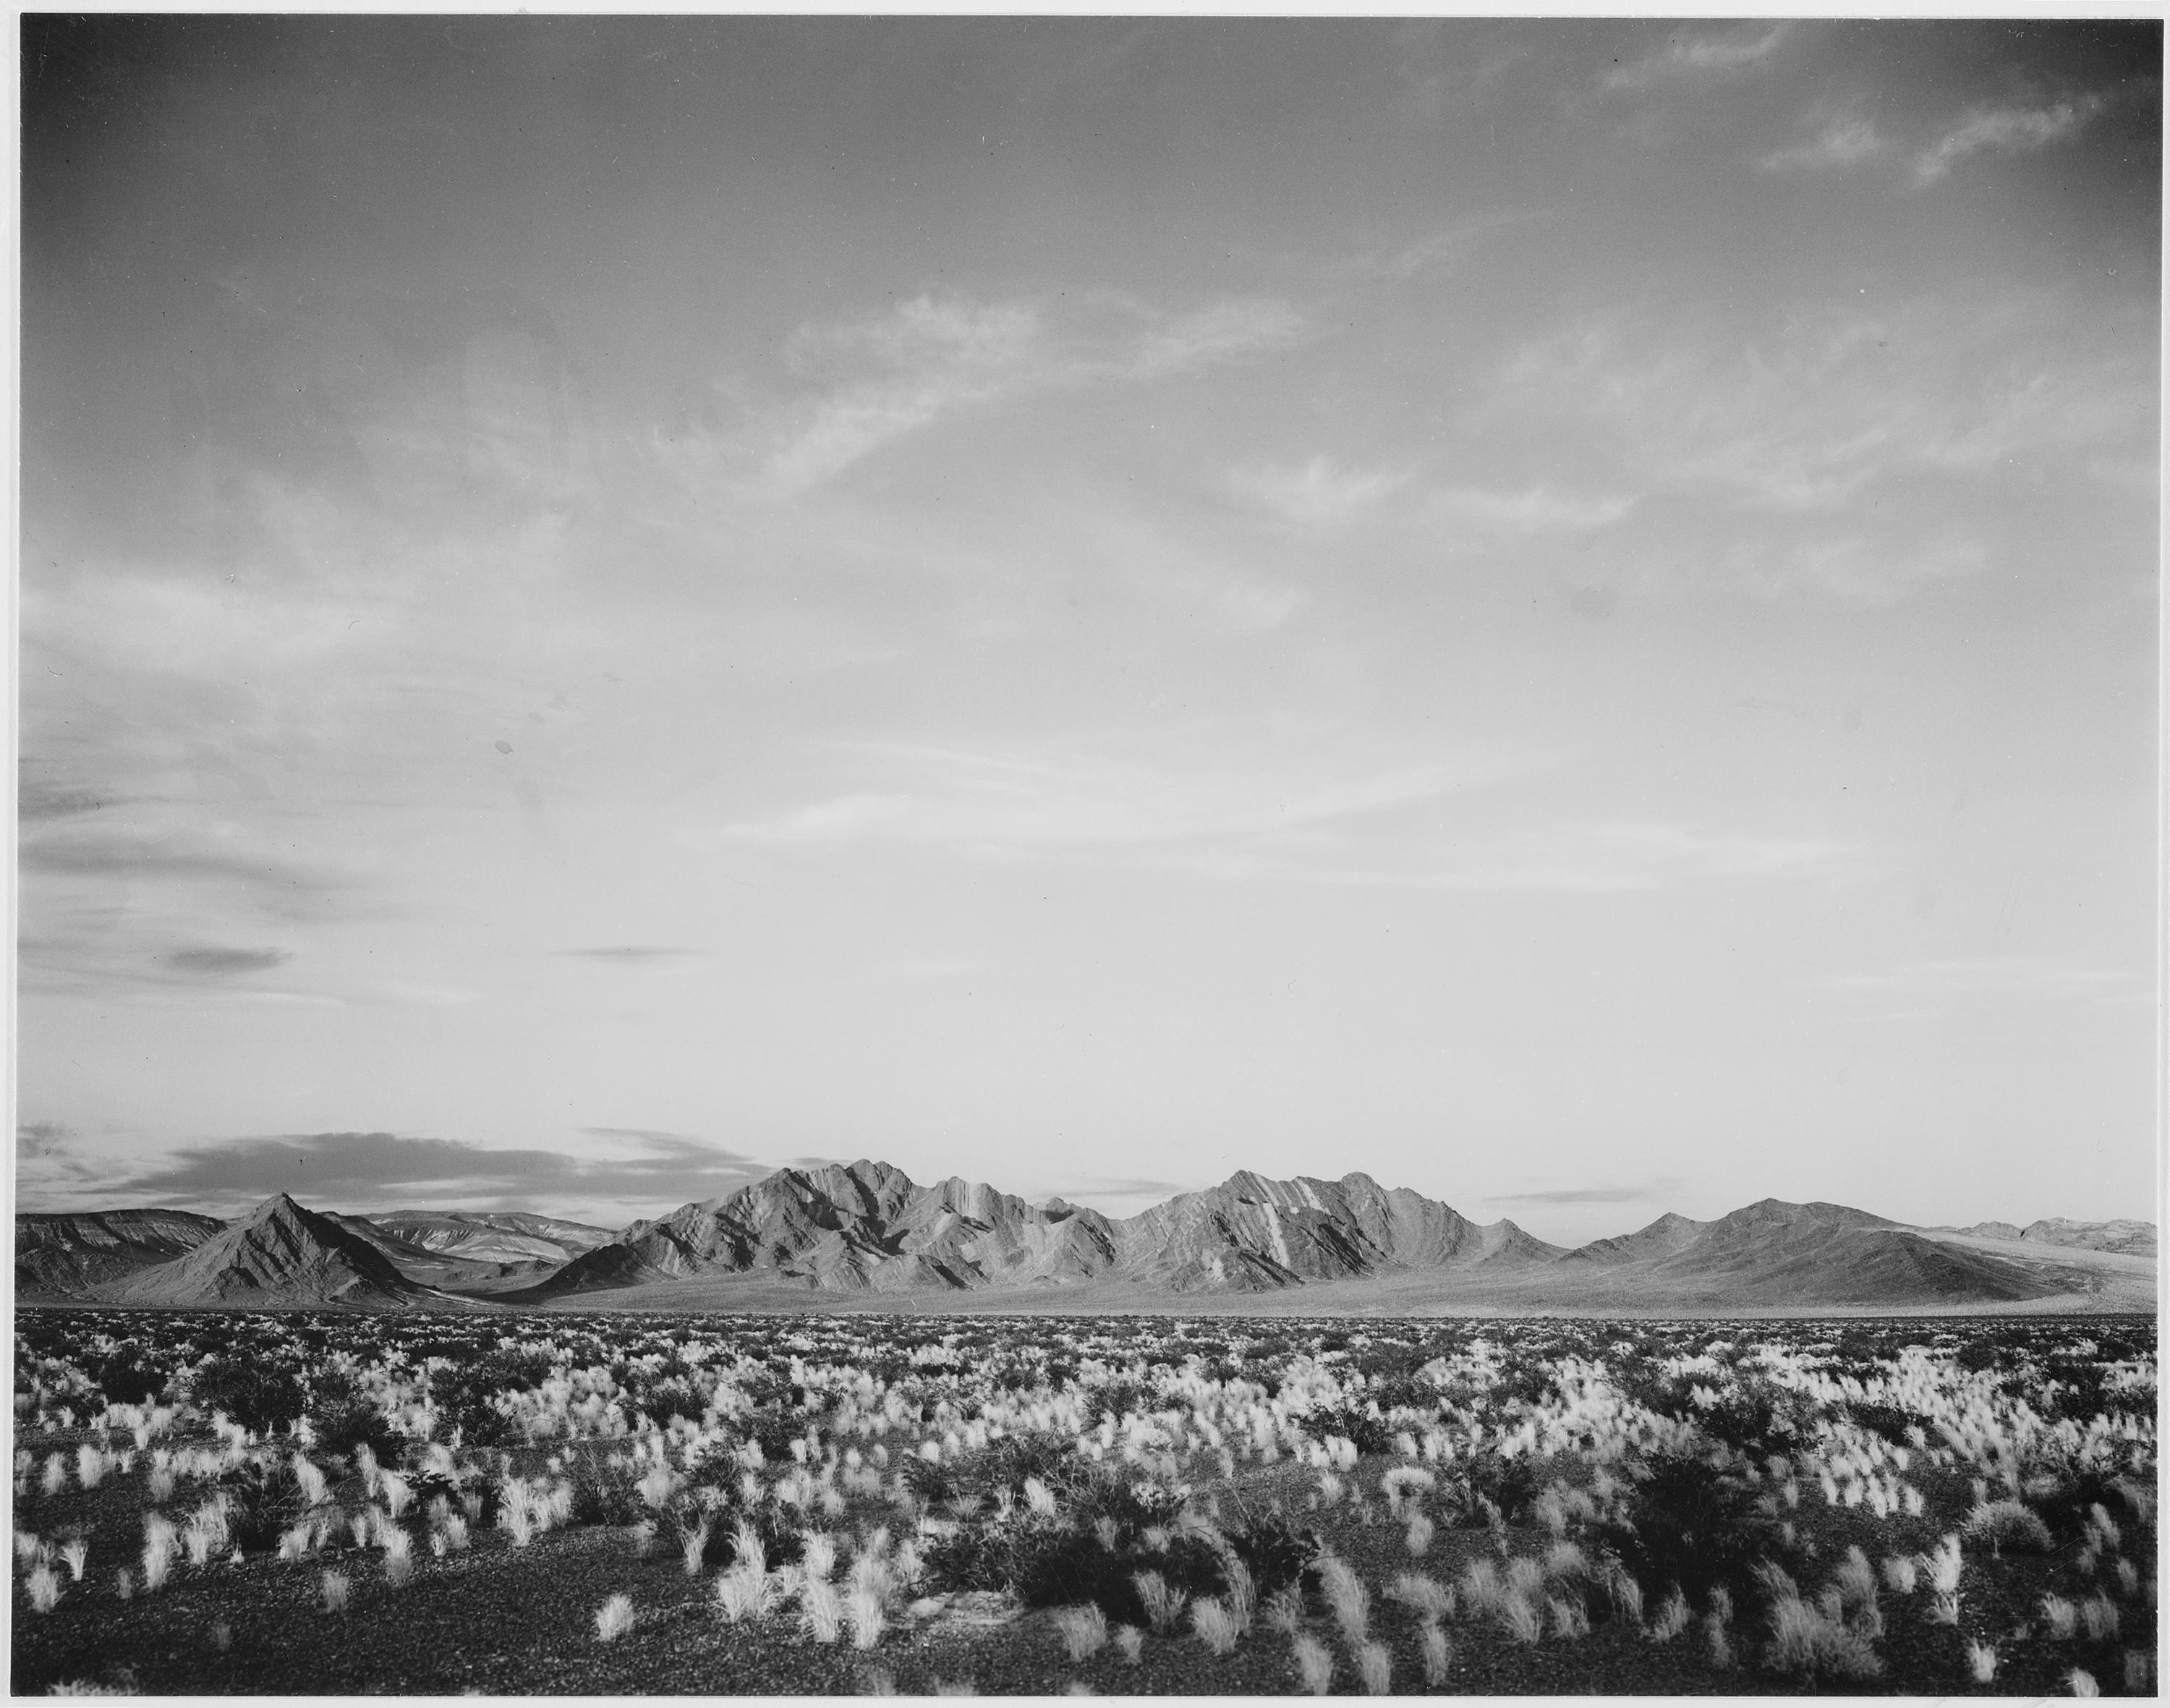 Ansel Adams - National Archives 79-AA-D03